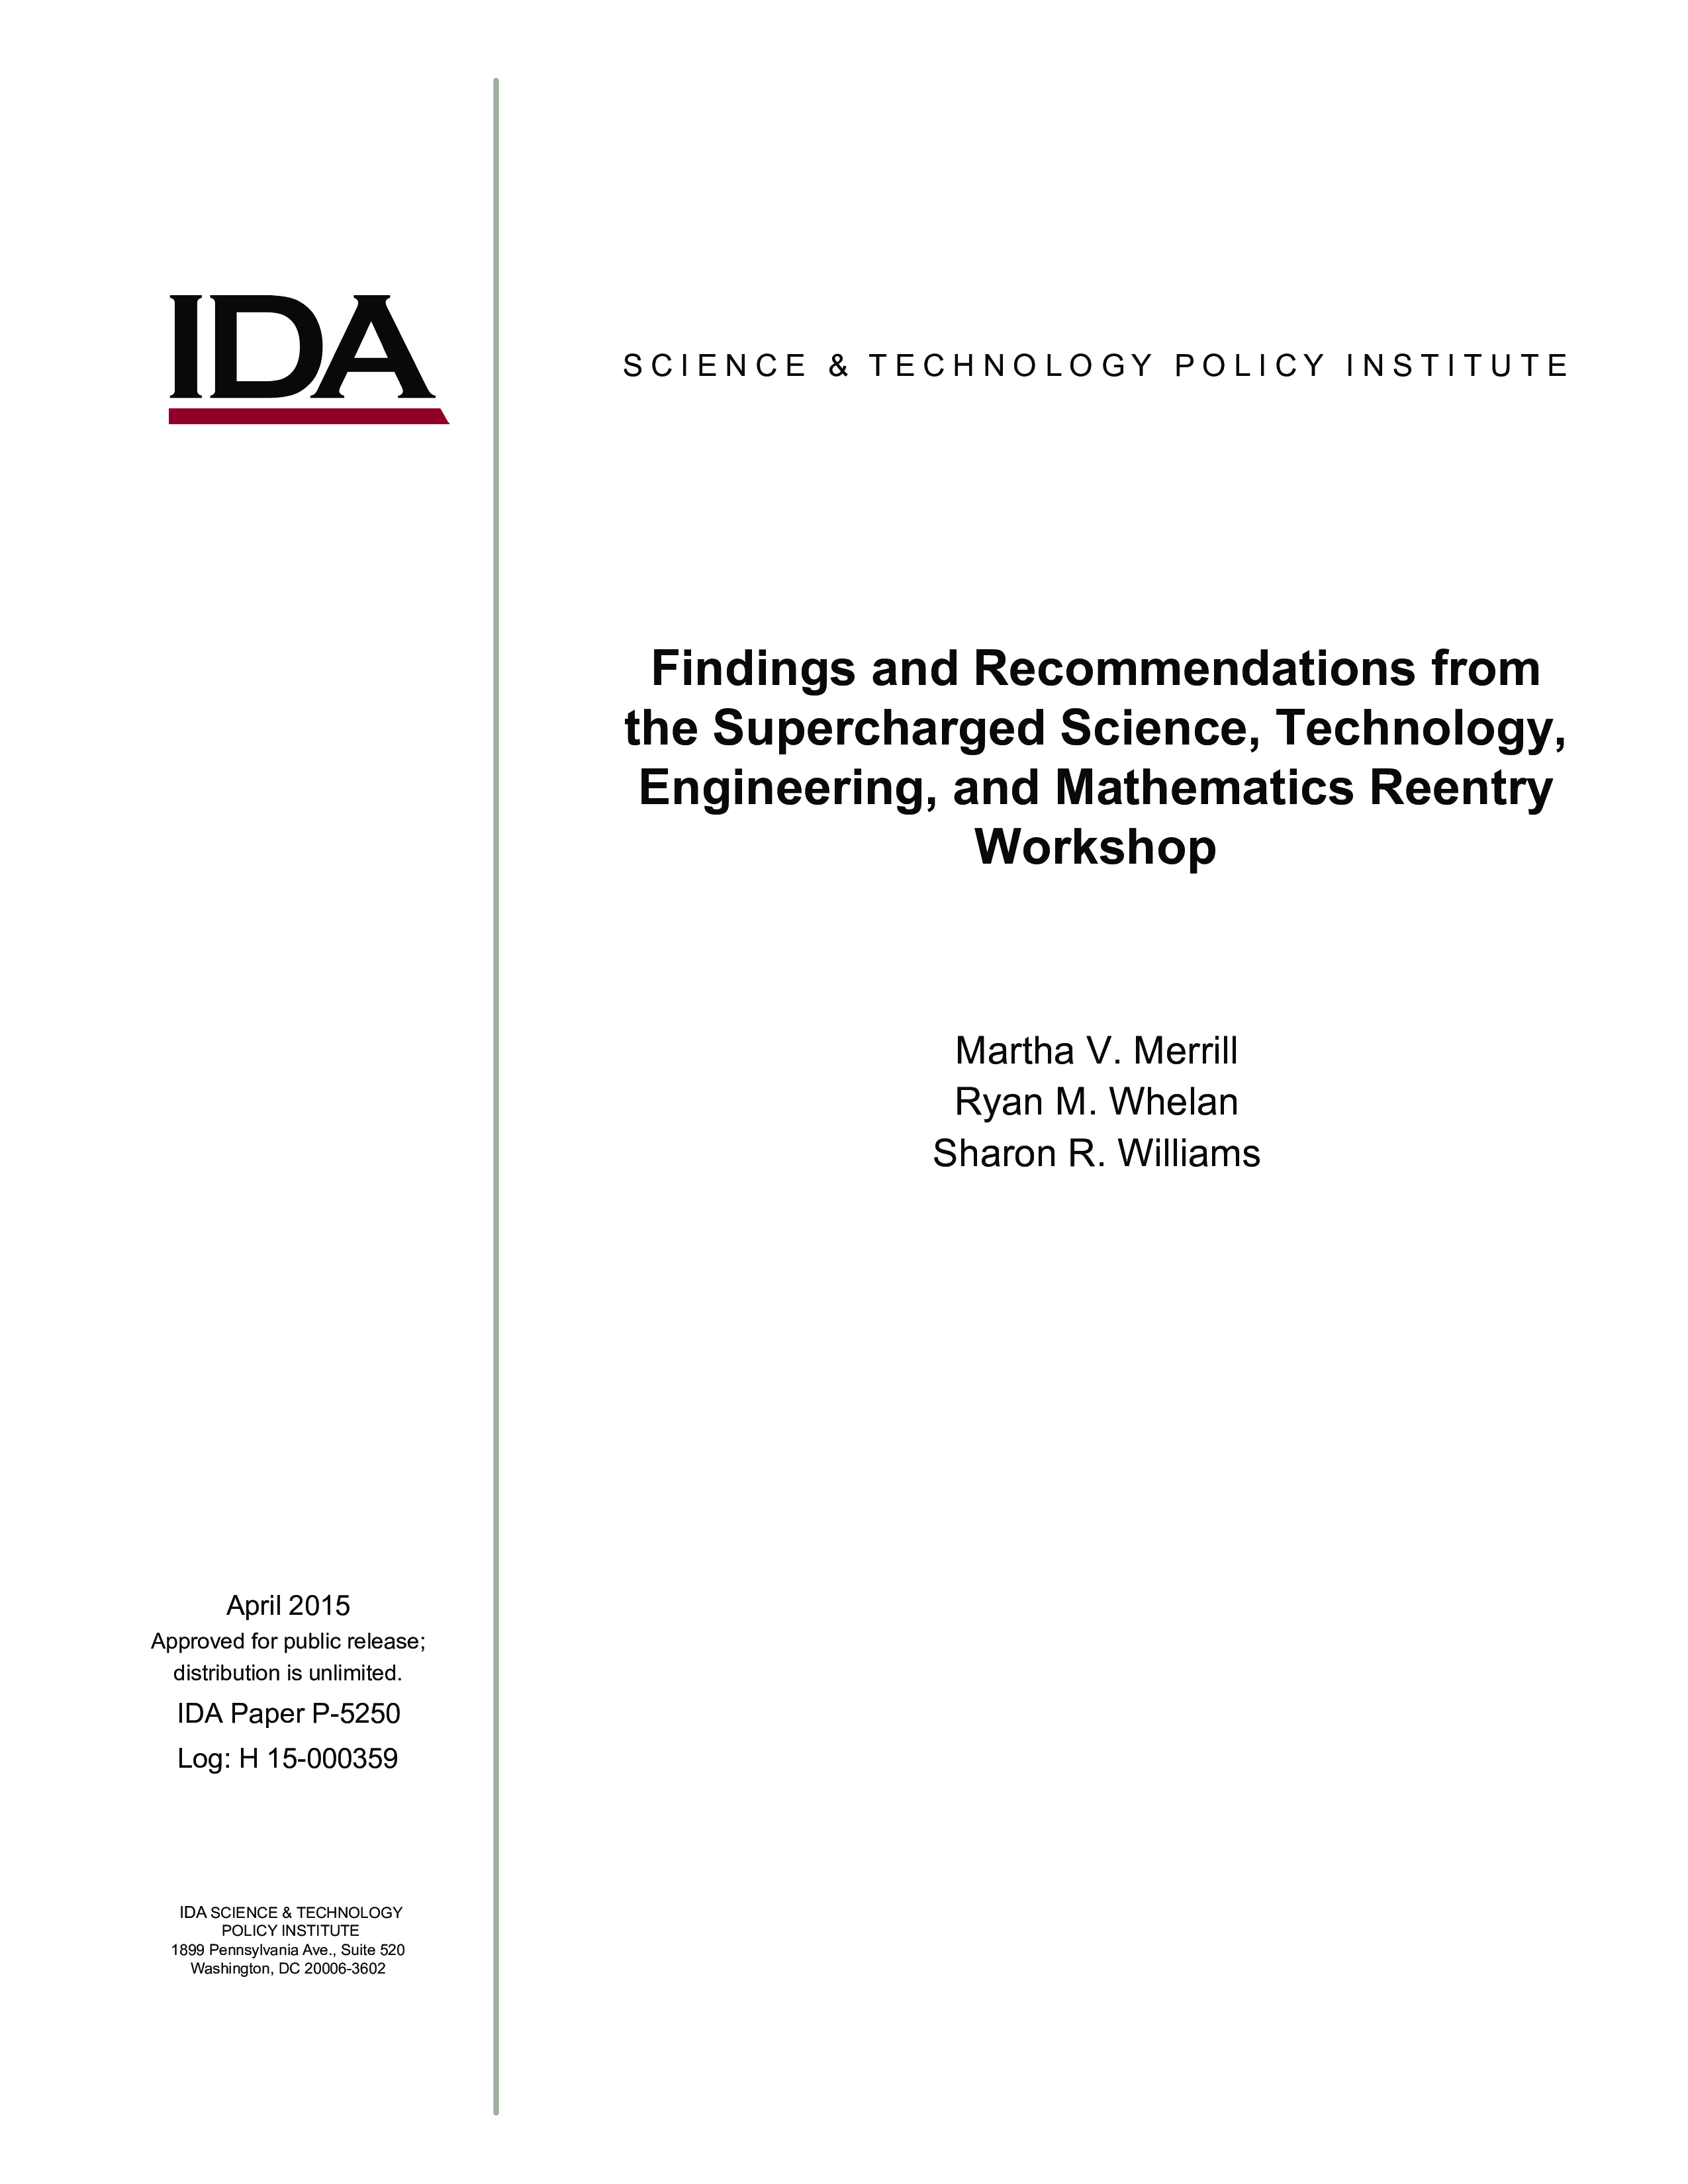 Findings and Recommendations from the Supercharged Science, Technology, Engineering, and Mathematics Reentry Workshop